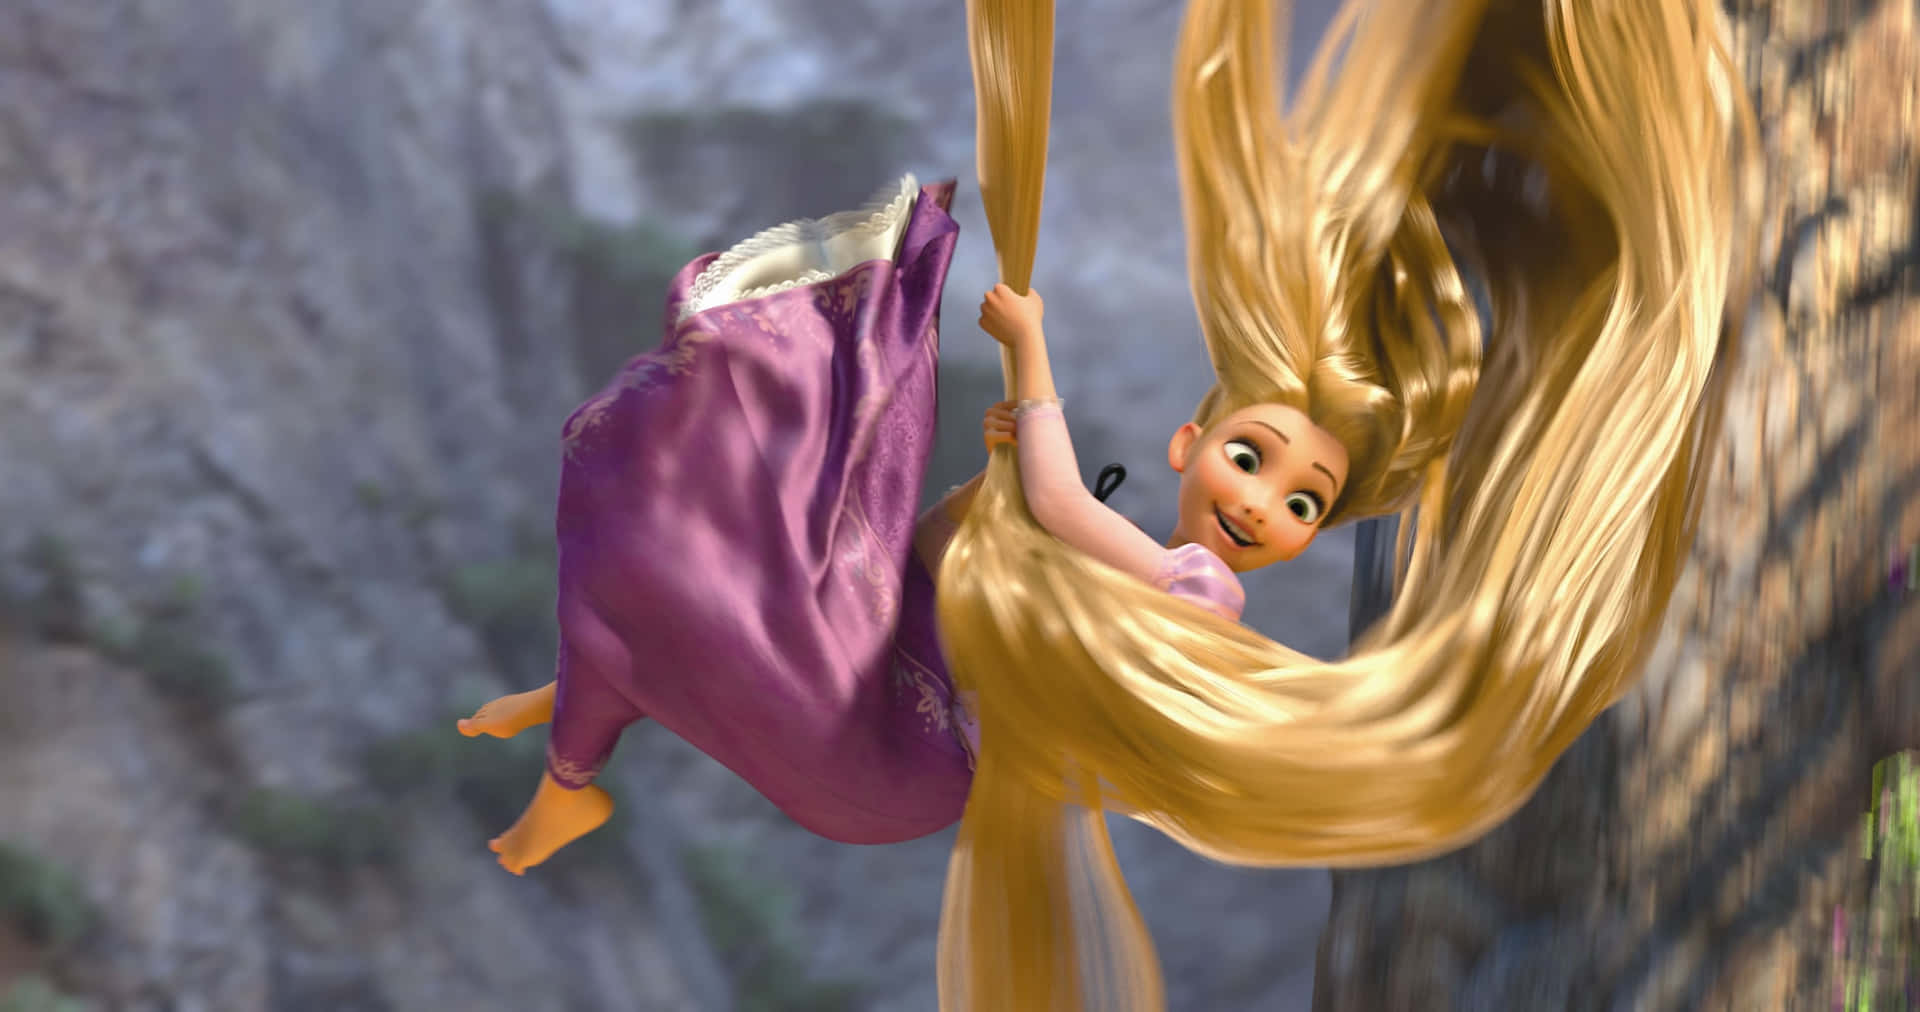 Enchanting Rapunzel standing gracefully in her tower